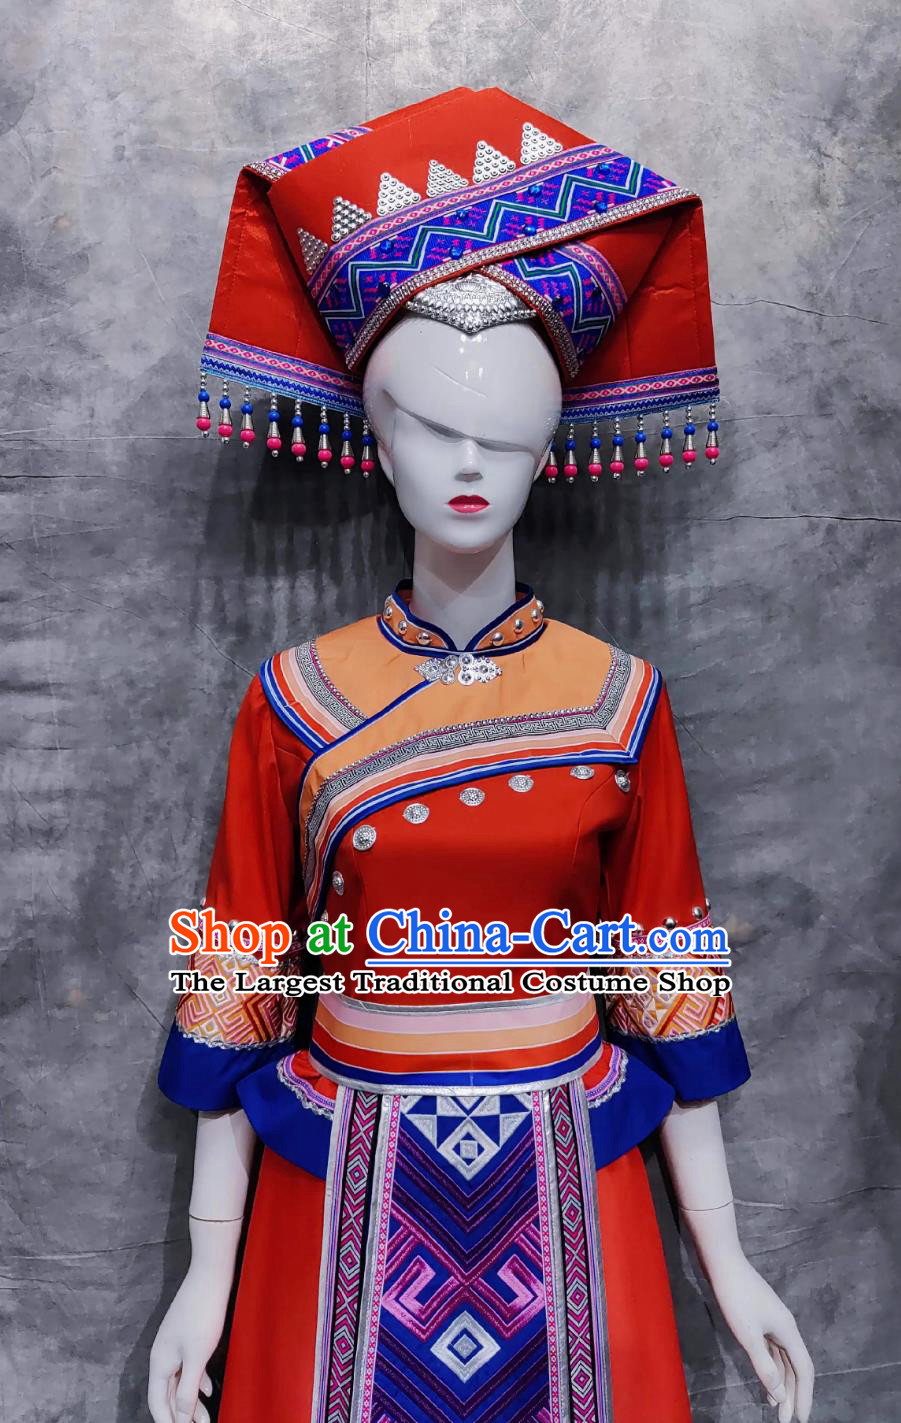 China Zhuang Ethnic Festival Clothing National Minority Dance Red Dress Chinese Guangxi March rd Woman Solo Costume